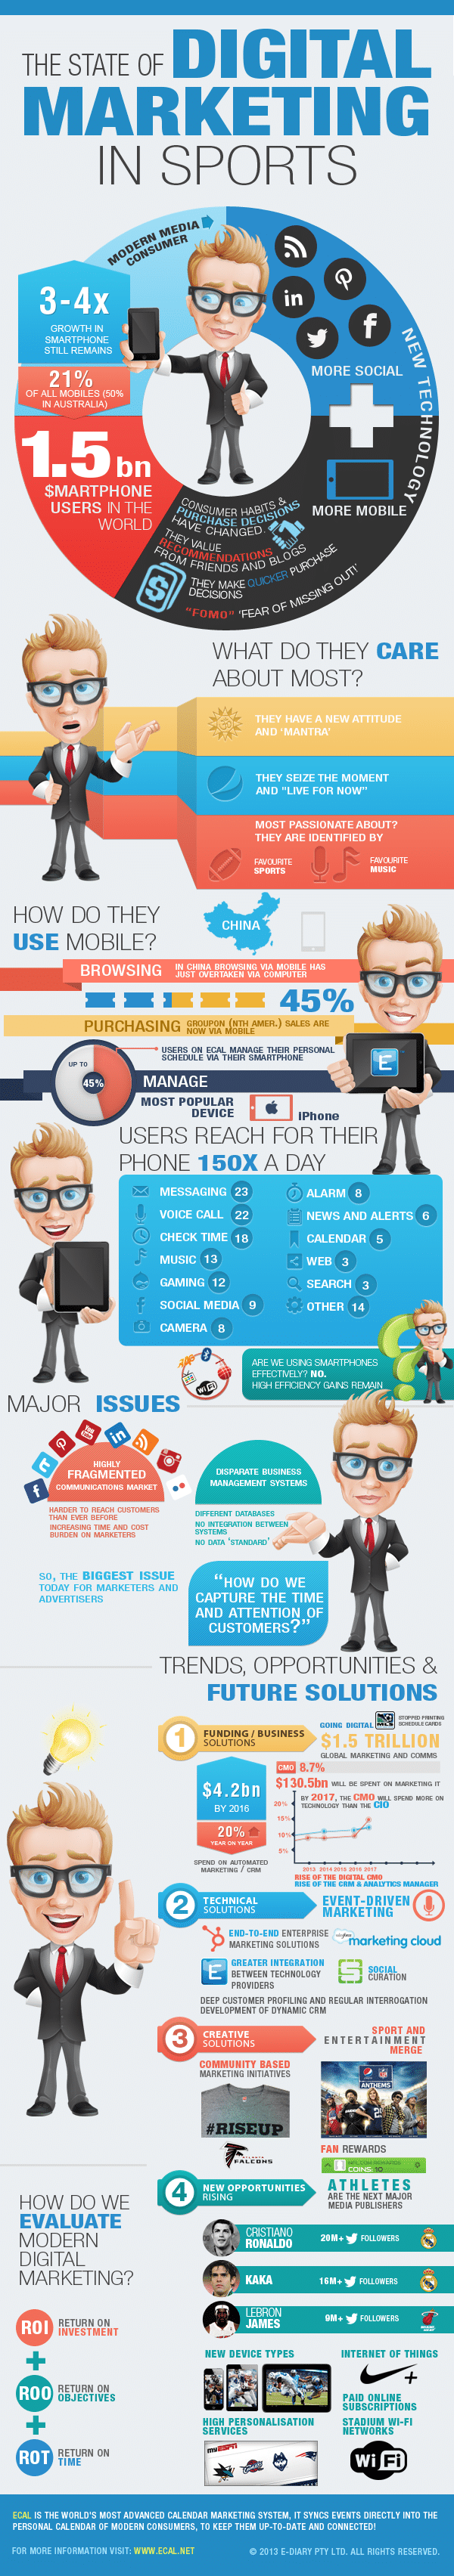 Infographic-State-of-Digital-Marketing-in-Sports